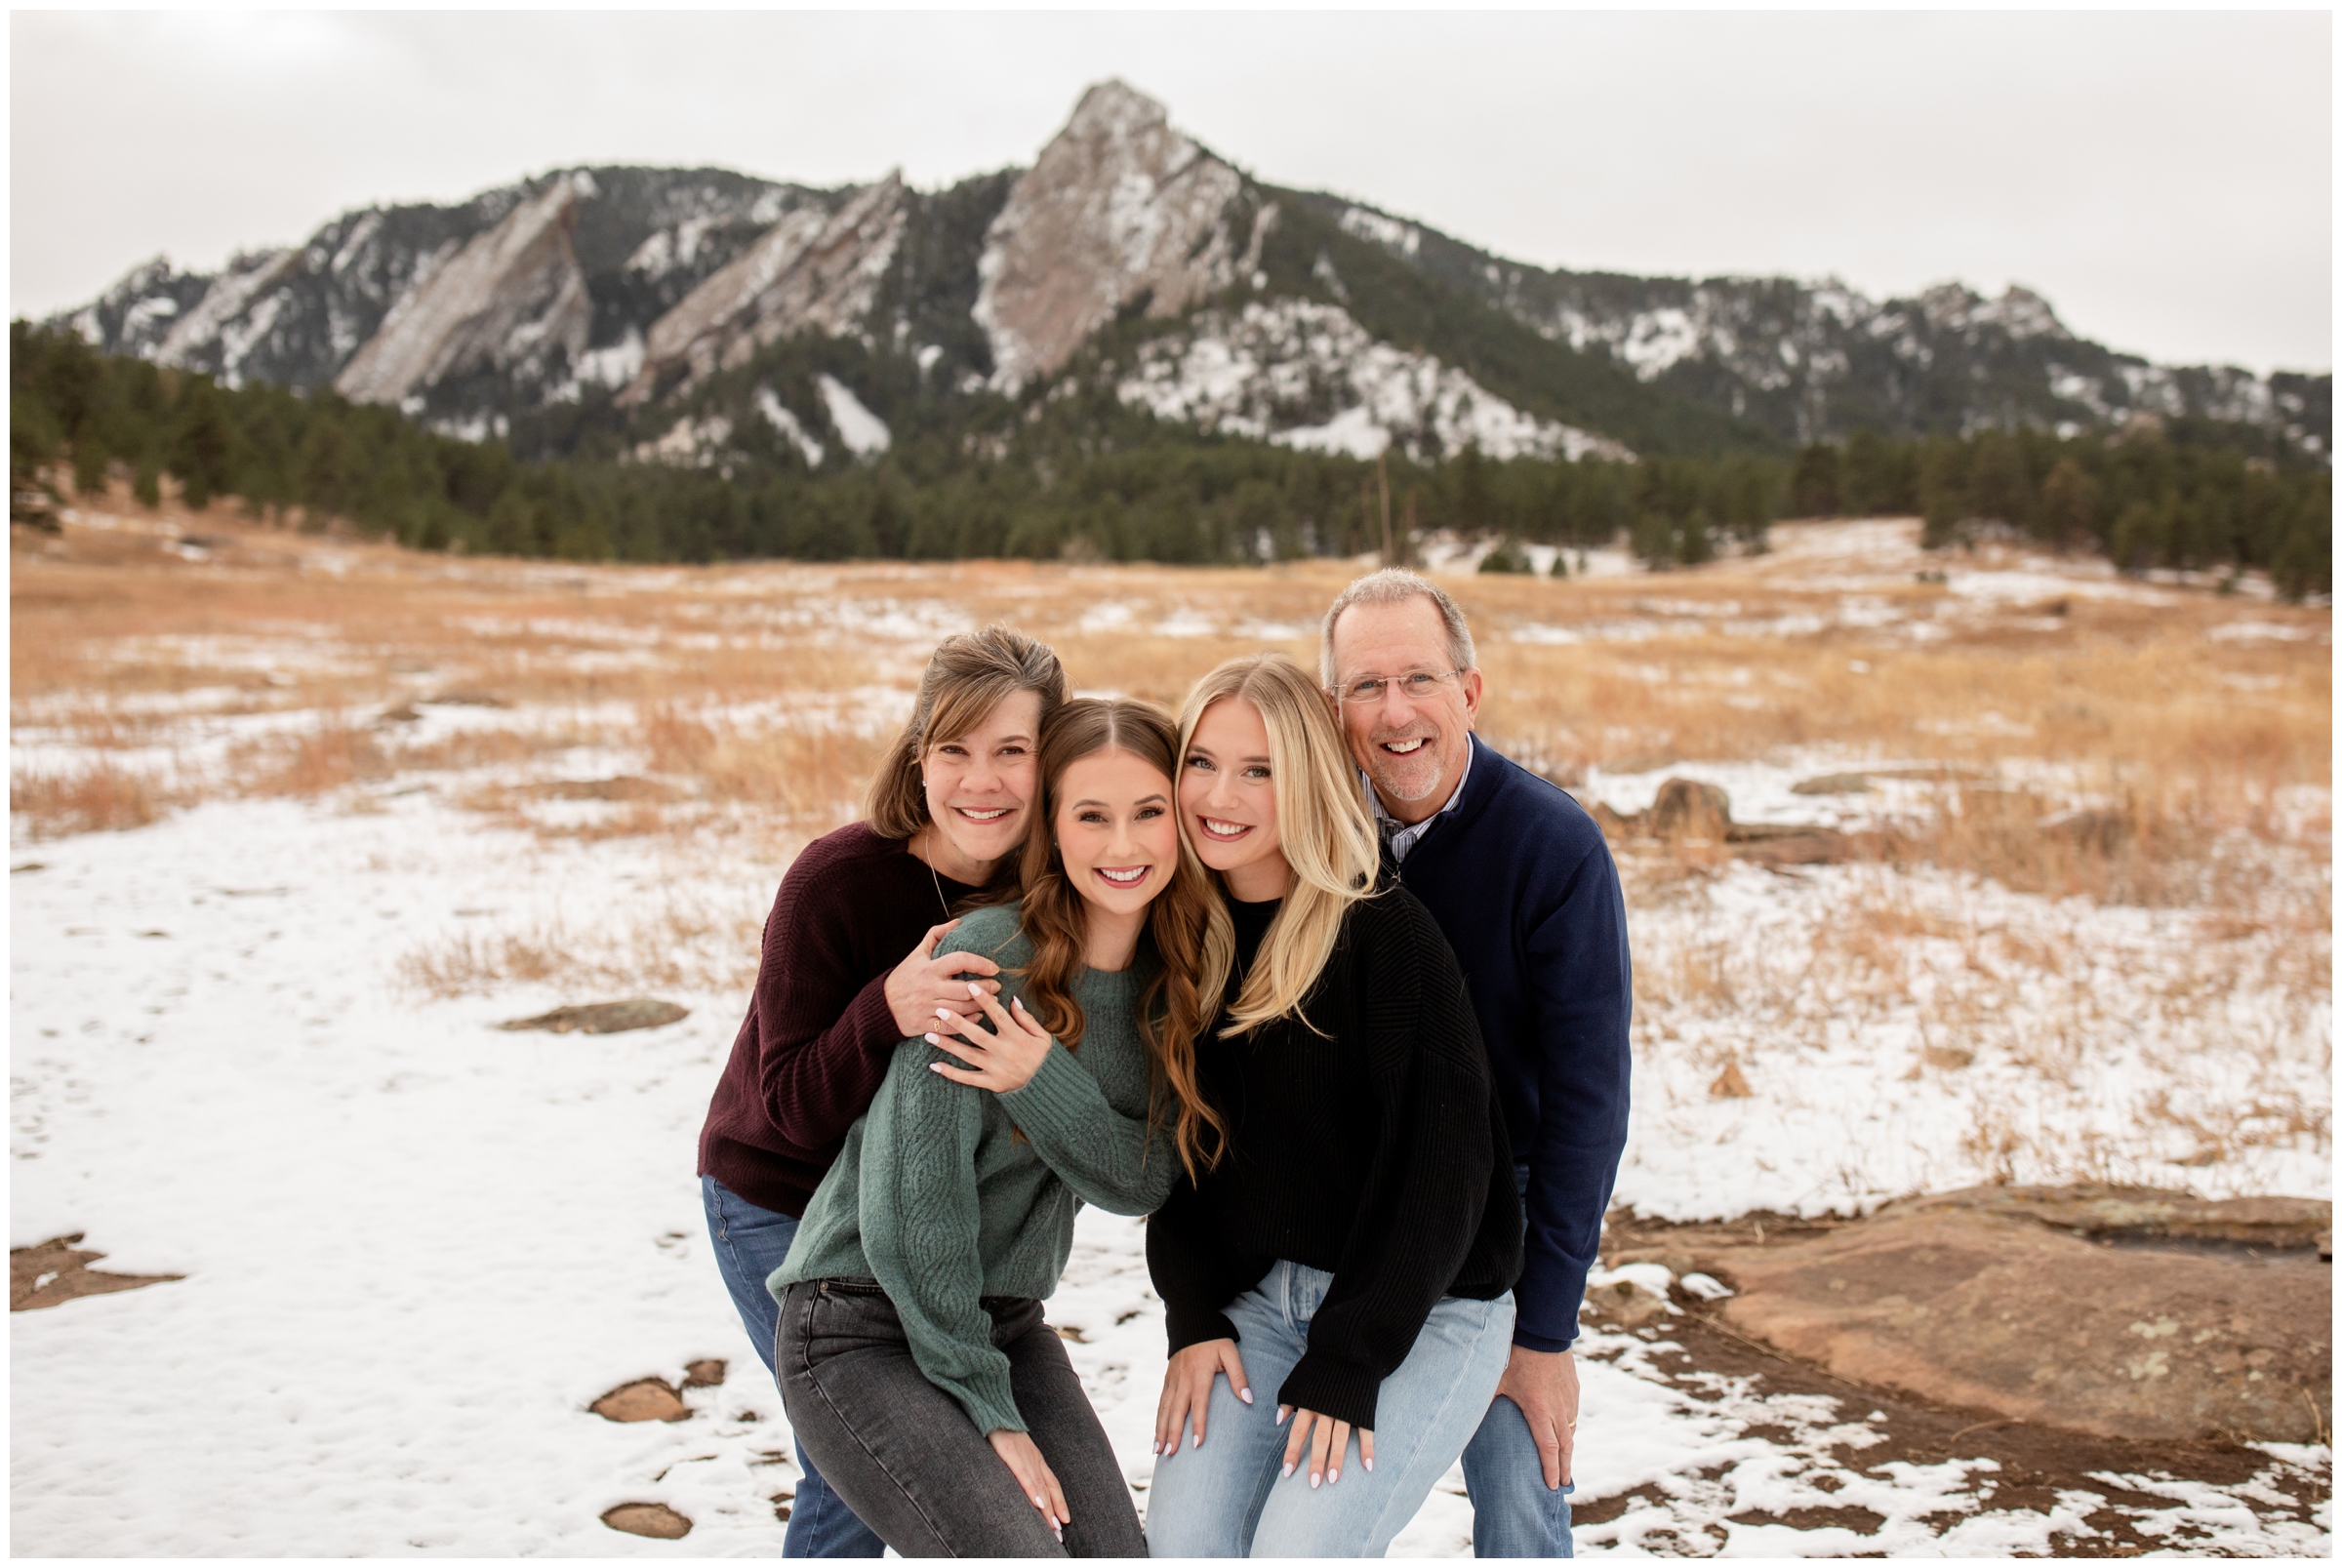 adult family photography session at Chautauqua Park during winter